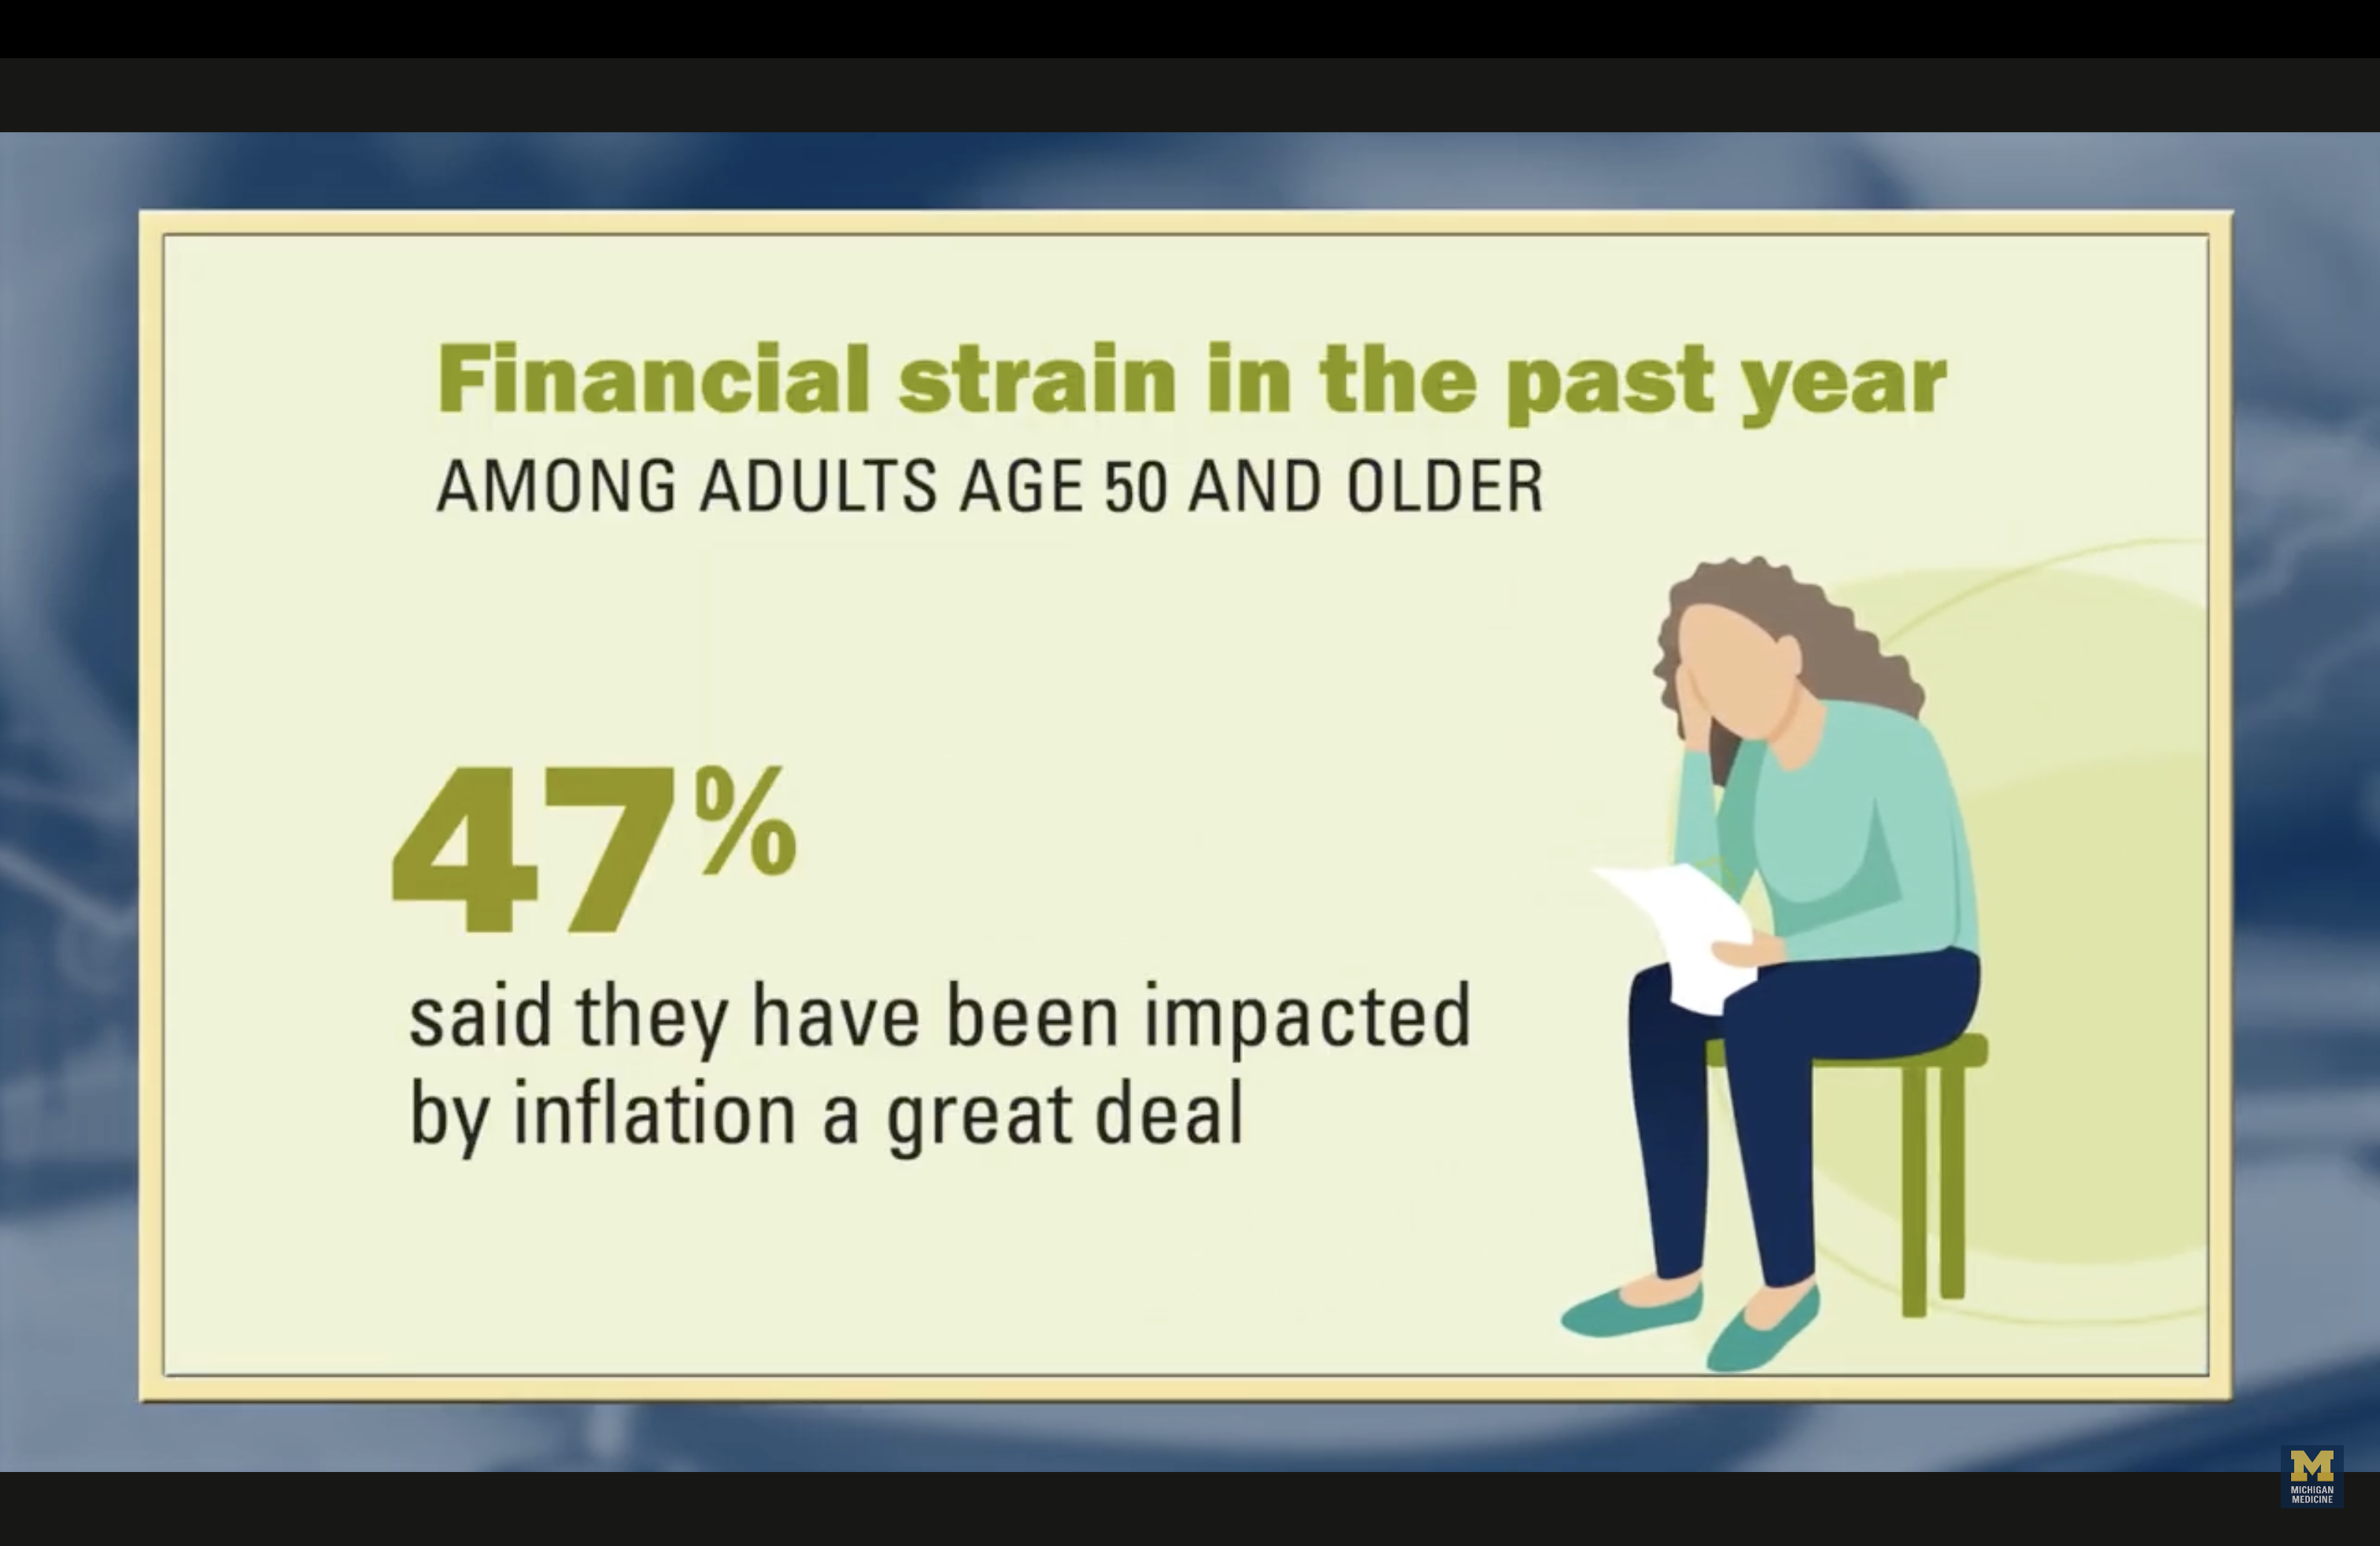 Financial strain in the past year among adults age 50 and older. Forty-seven percent said they have been impacted by inflation a great deal